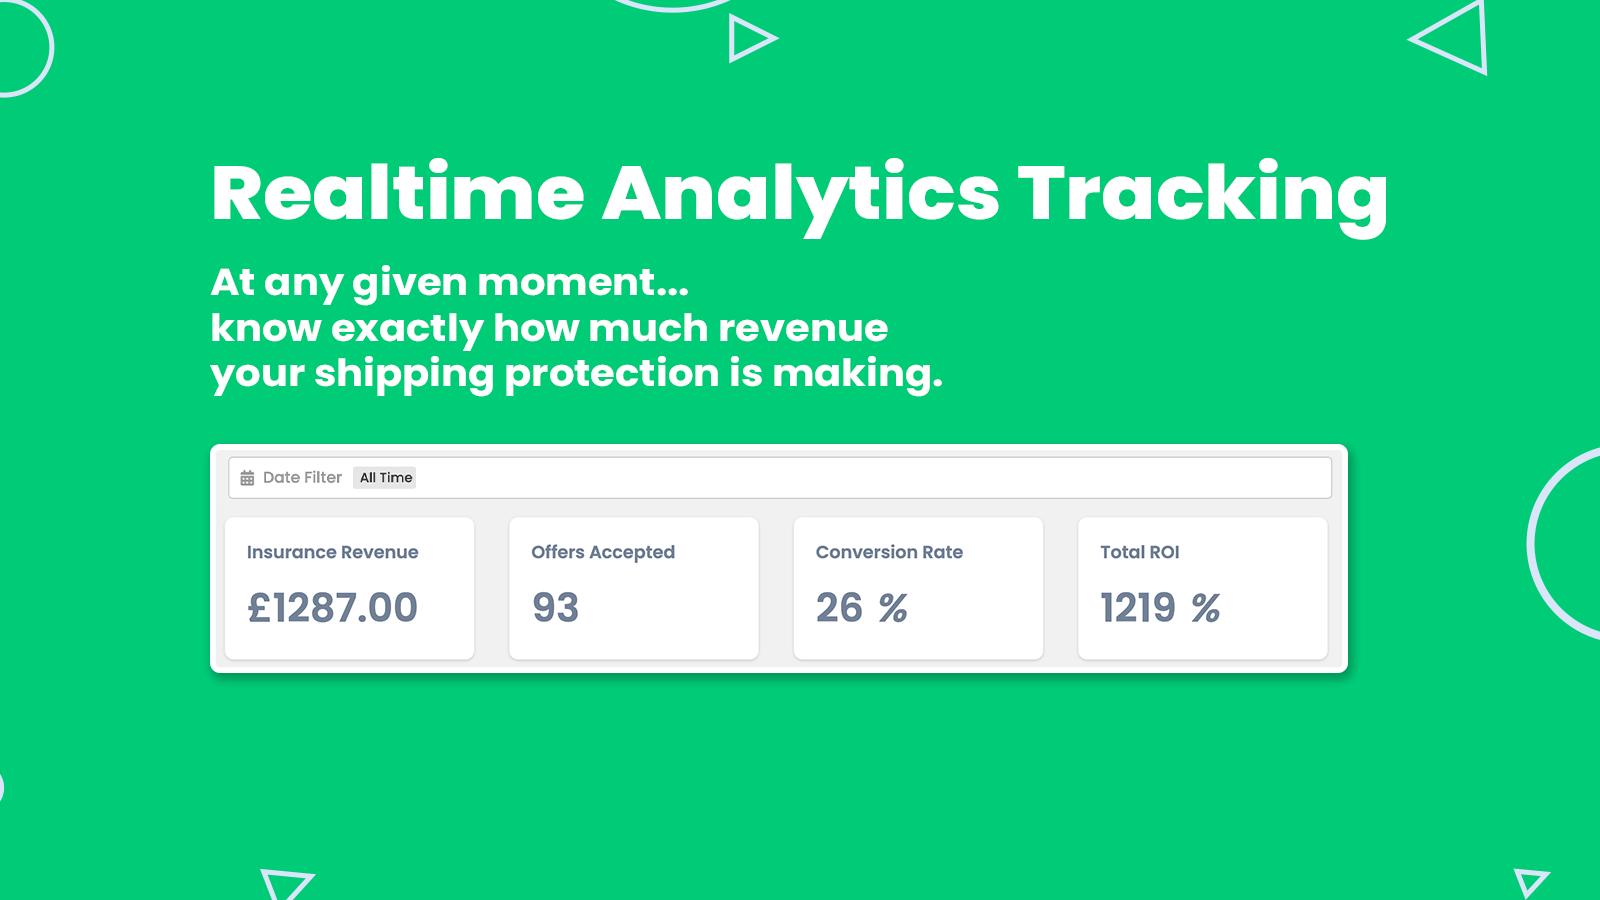 Realtime analyses